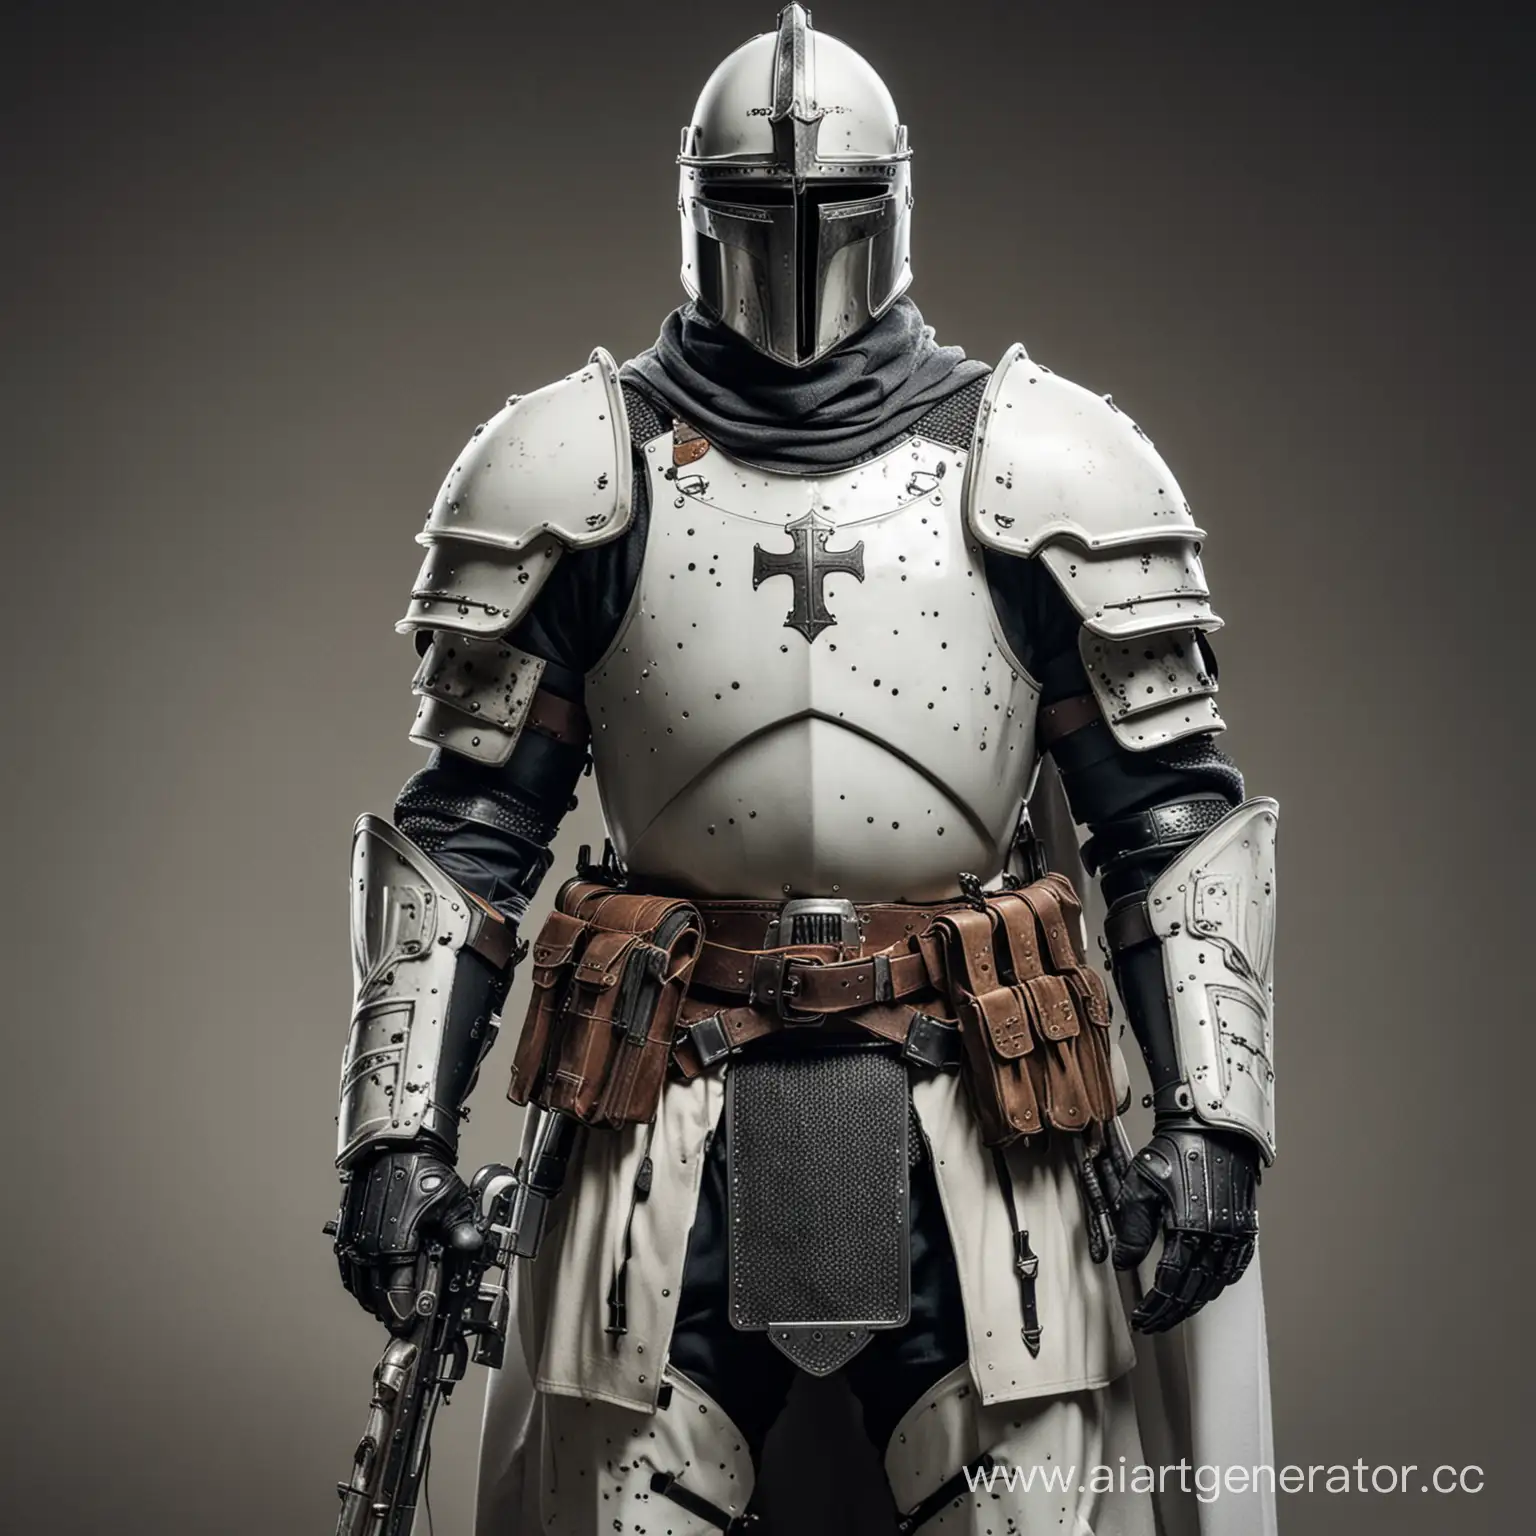 Modern-Teutonic-Knight-Armed-with-Futuristic-Weaponry